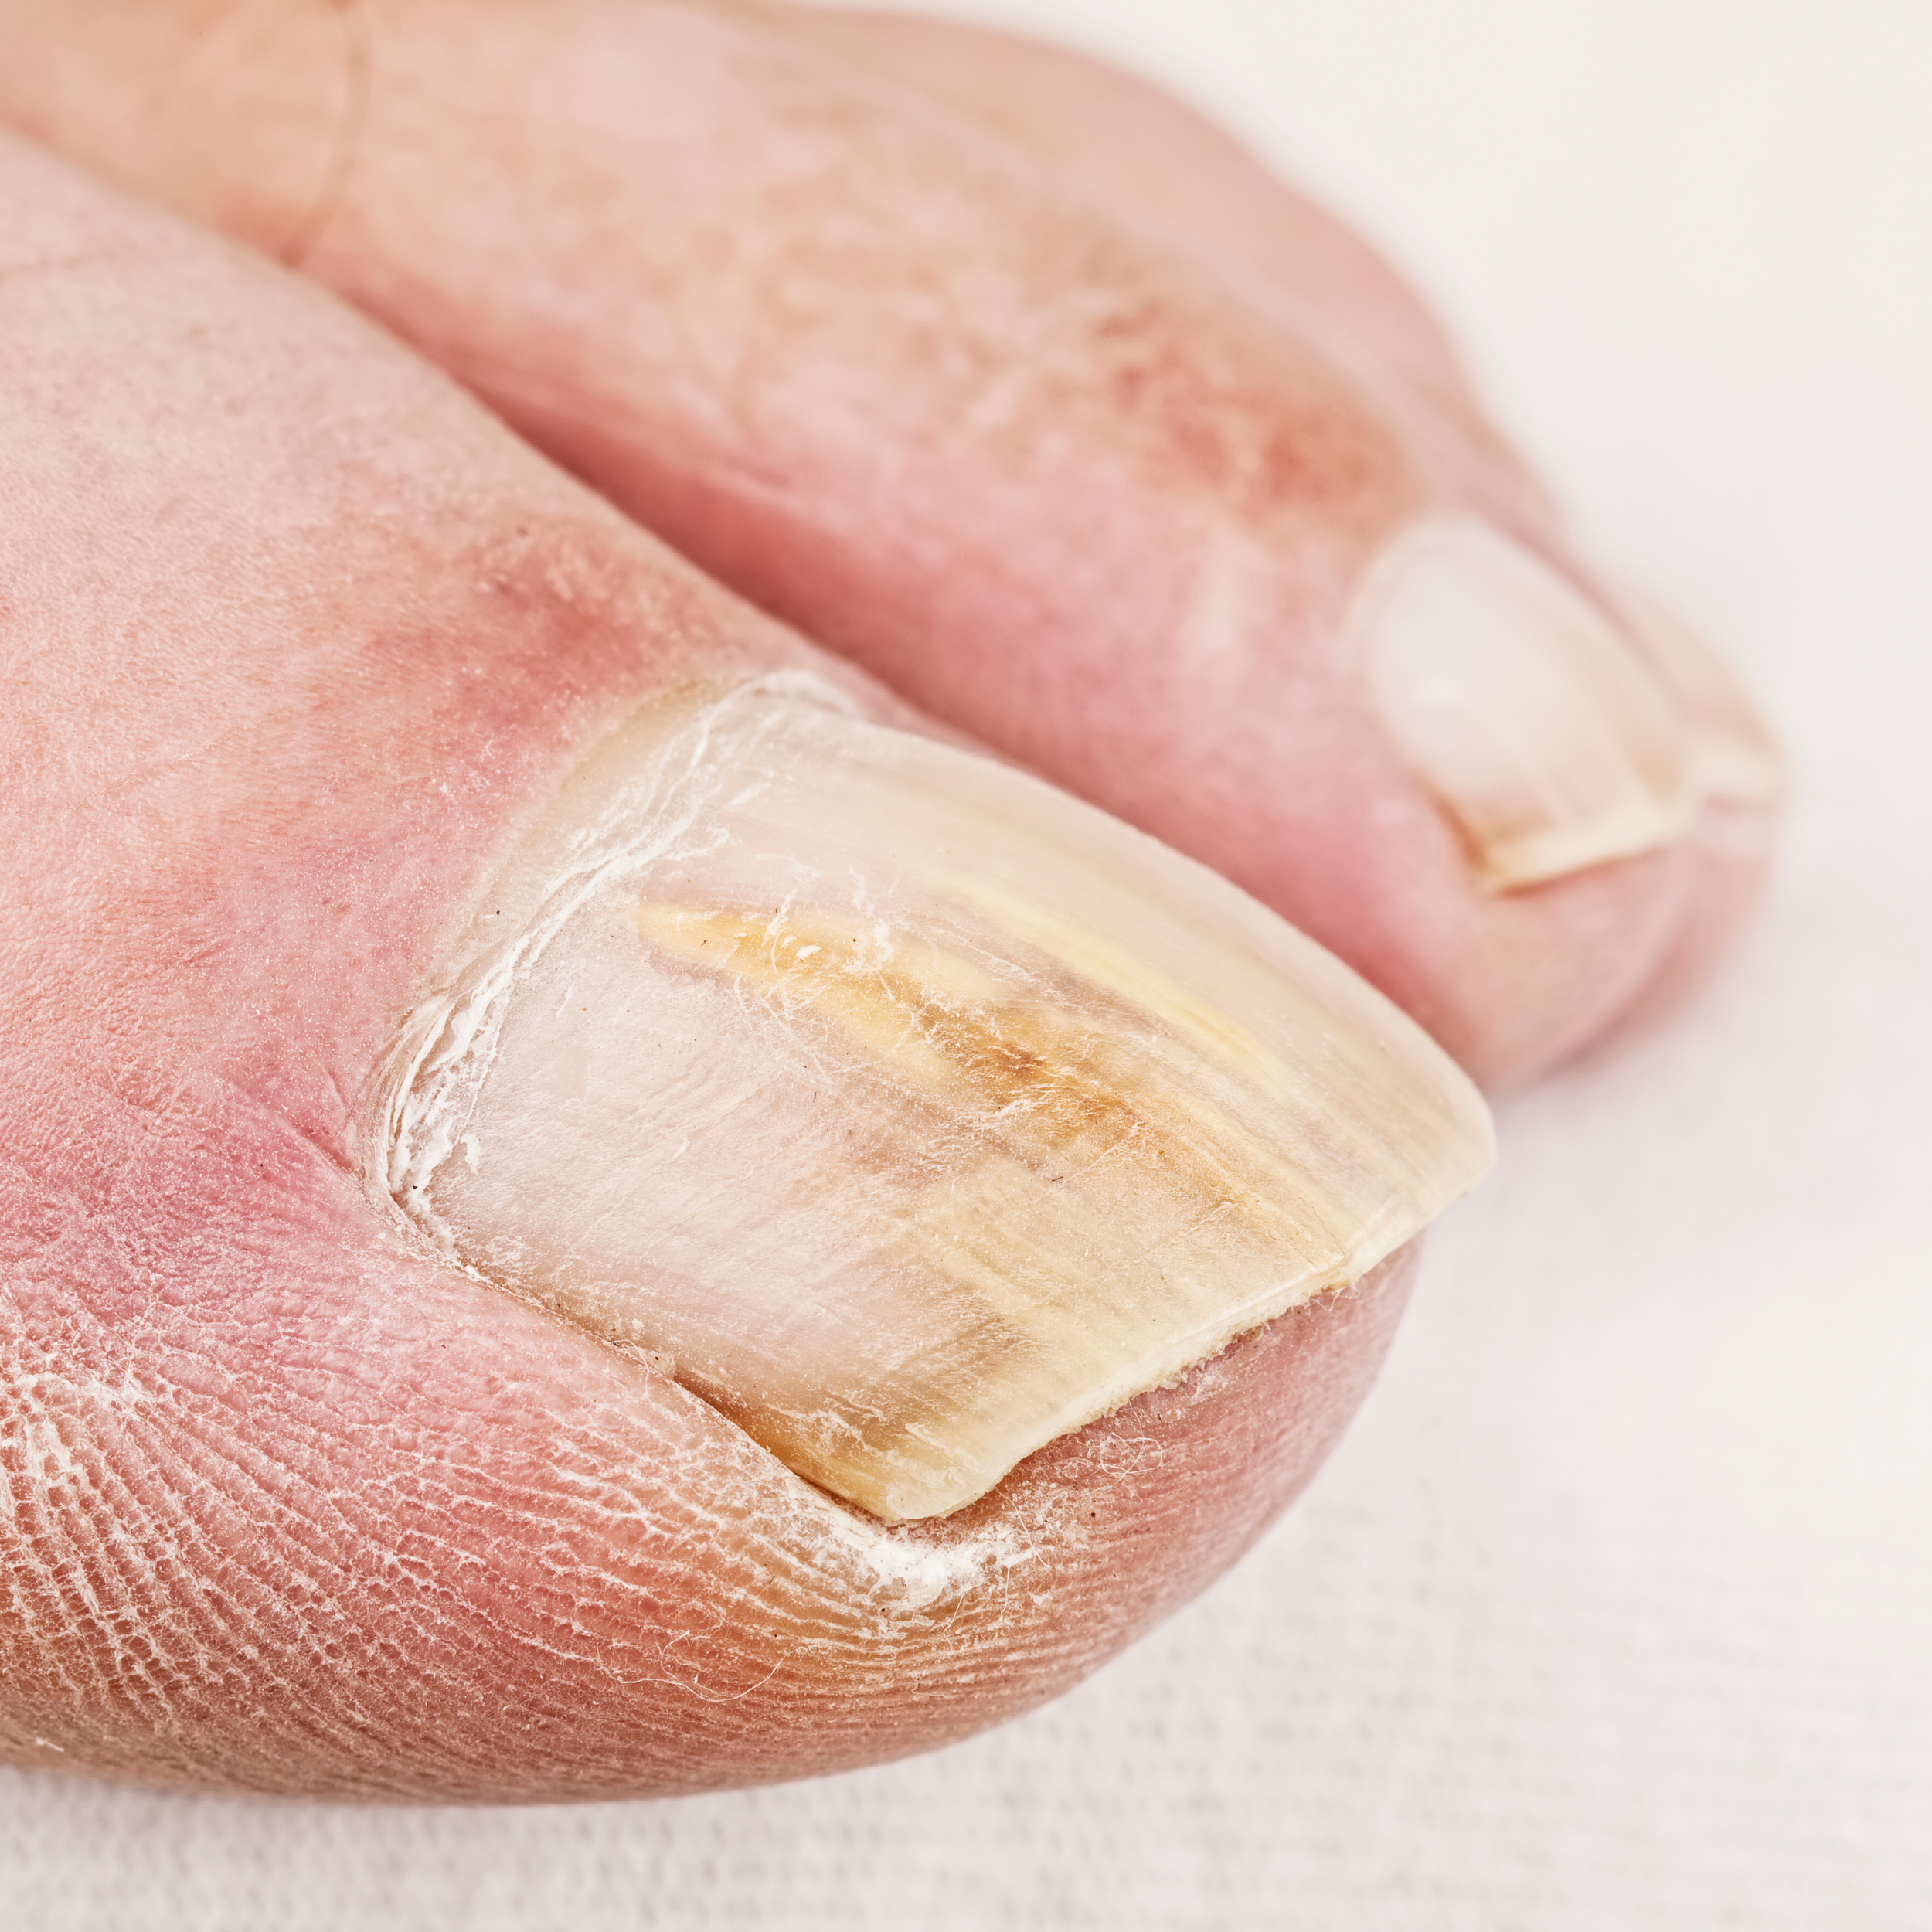 Early Stage Onychomadesis Presenting as Painful Swellings of Proximal Nail  Folds